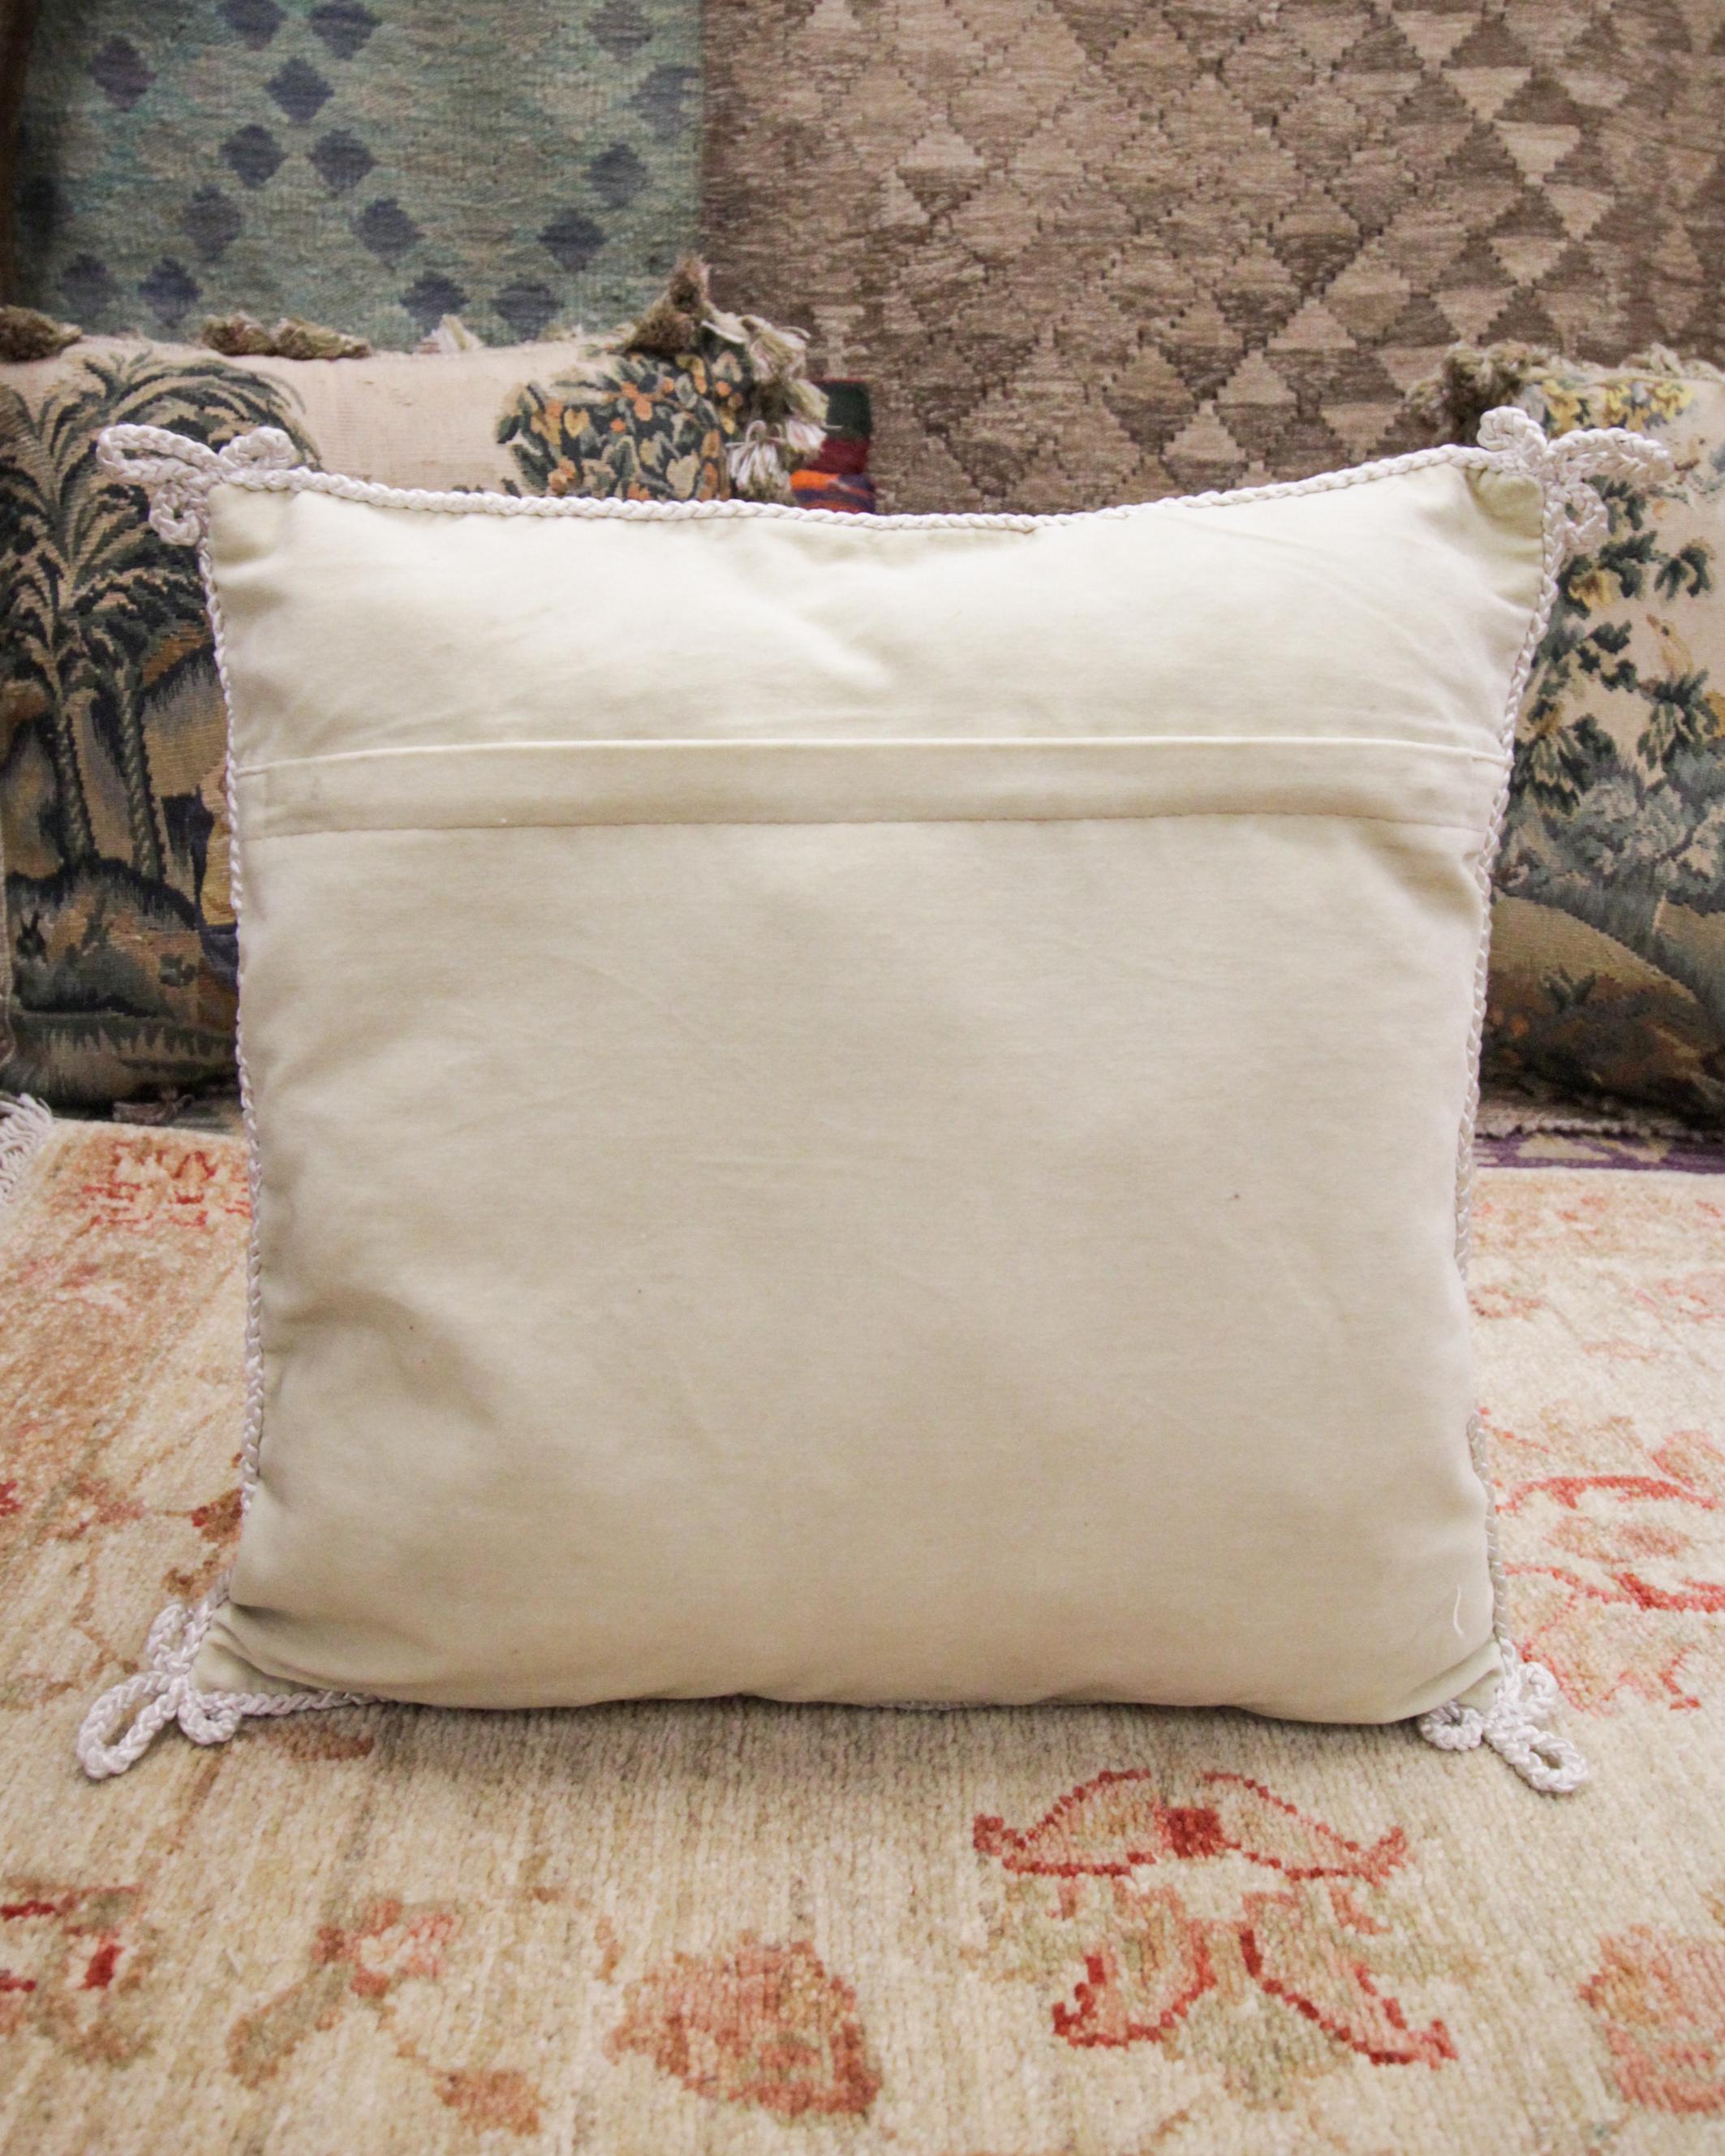 Floral Cushion Cover Hand Embroidered Pillow Case Pink Wool Scatter Cushion In Excellent Condition For Sale In Hampshire, GB